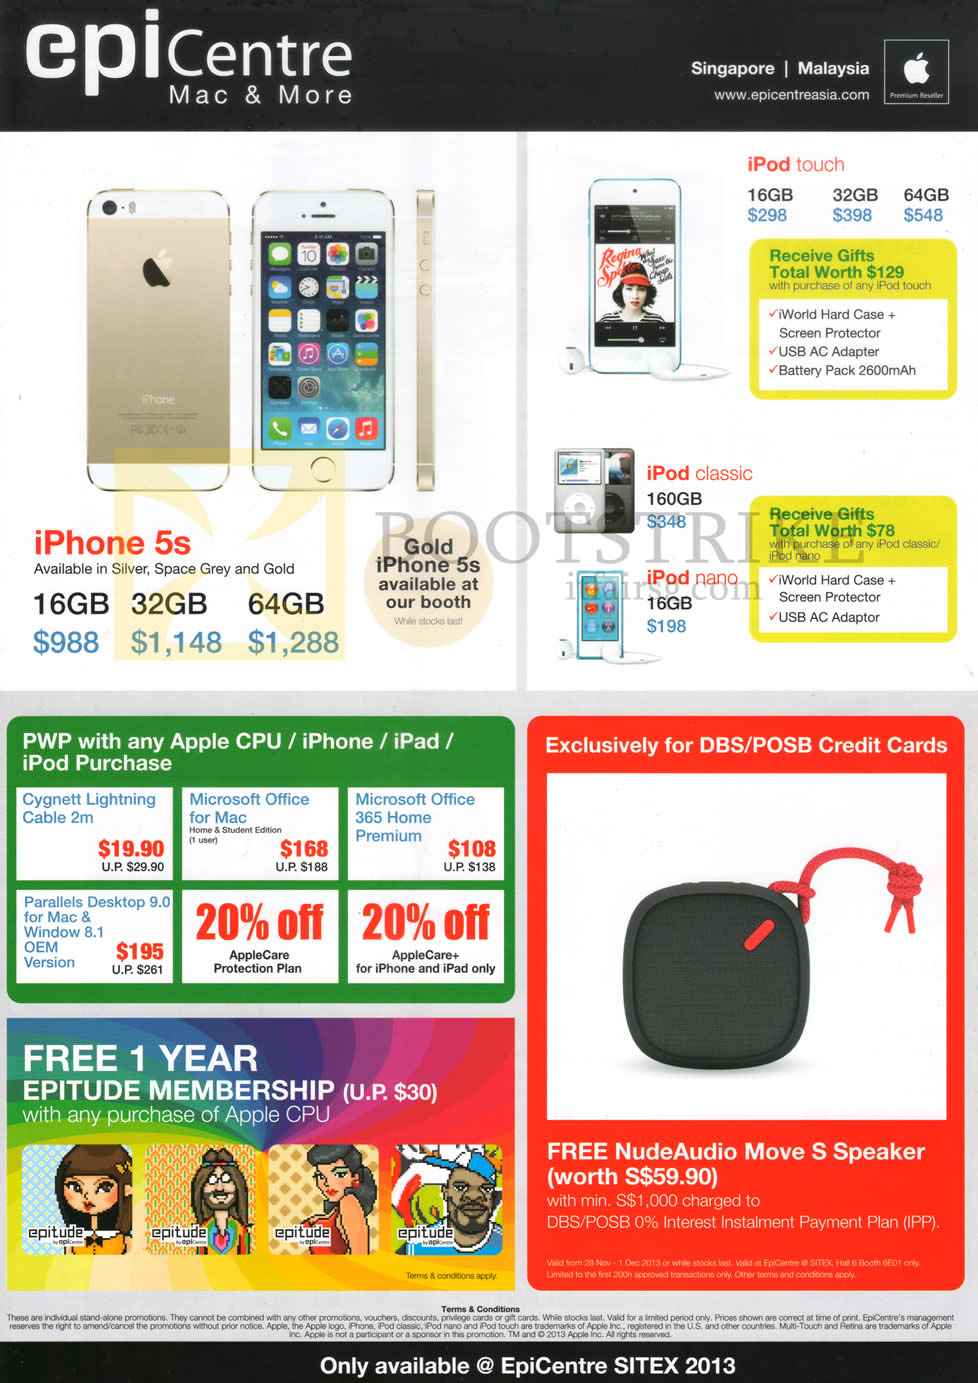 SITEX 2013 price list image brochure of Epicentre Apple IPhone 5S, IPod Touch, Classic, Nano, Purchase With Purchase, Parallels, Microsoft Office, DBS POSB